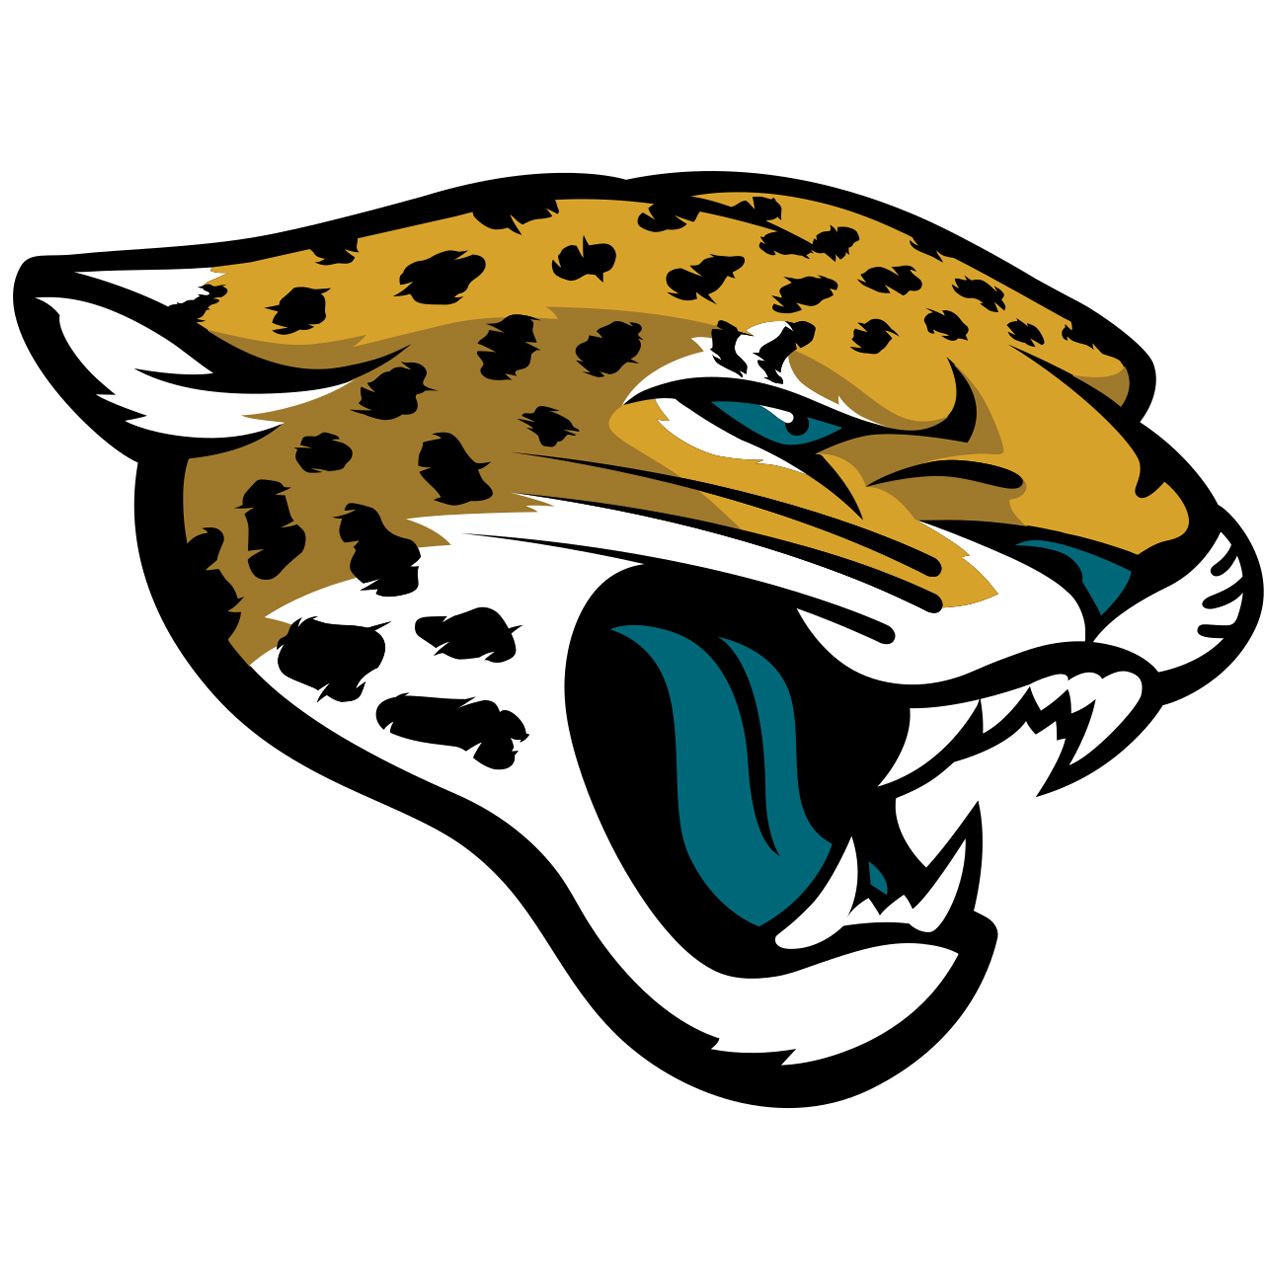 Jaguars playoff tickets now on sale